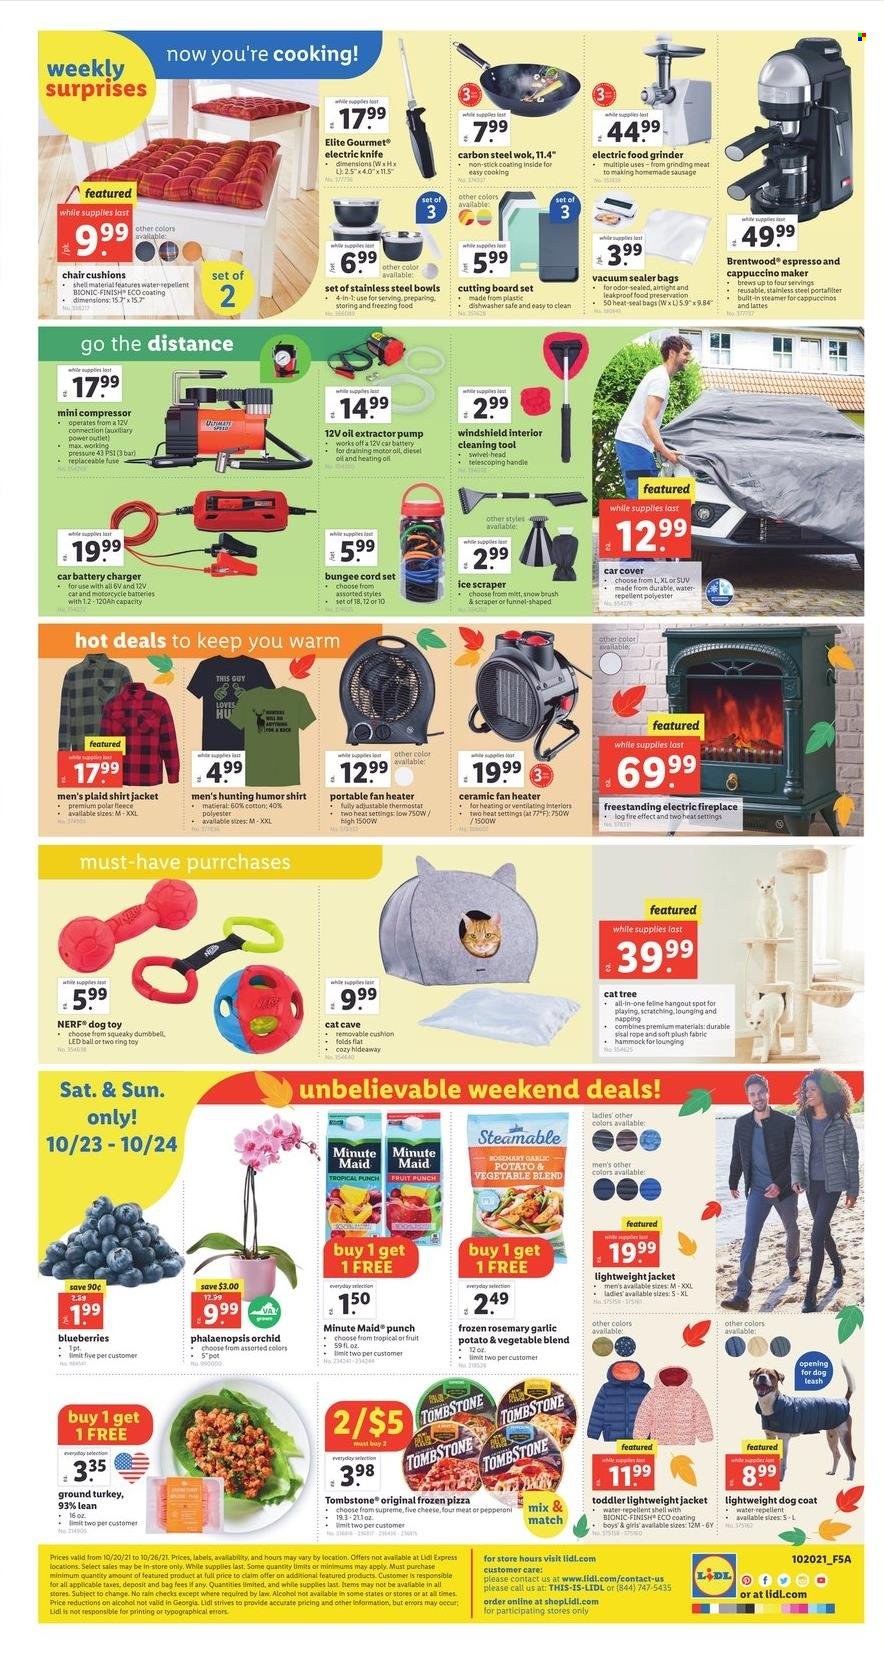 thumbnail - Lidl Flyer - 10/20/2021 - 10/26/2021 - Sales products - blueberries, pizza, sausage, pepperoni, rosemary, oil, fruit punch, cappuccino, L'Or, ground turkey, repellent, knife, vacuum sealer, cleaning tools, cutting board, wok, battery charger, chair pad, cushion, Nerf, pet bed, dog toy, cat tree, coffee machine, cappuccino maker, grinder, chair, coat, jacket, shirt, pump, toys, motorcycle, fan heater, fireplace, electric fireplace, air compressor, cord set, hammock, car battery, Shell. Page 2.